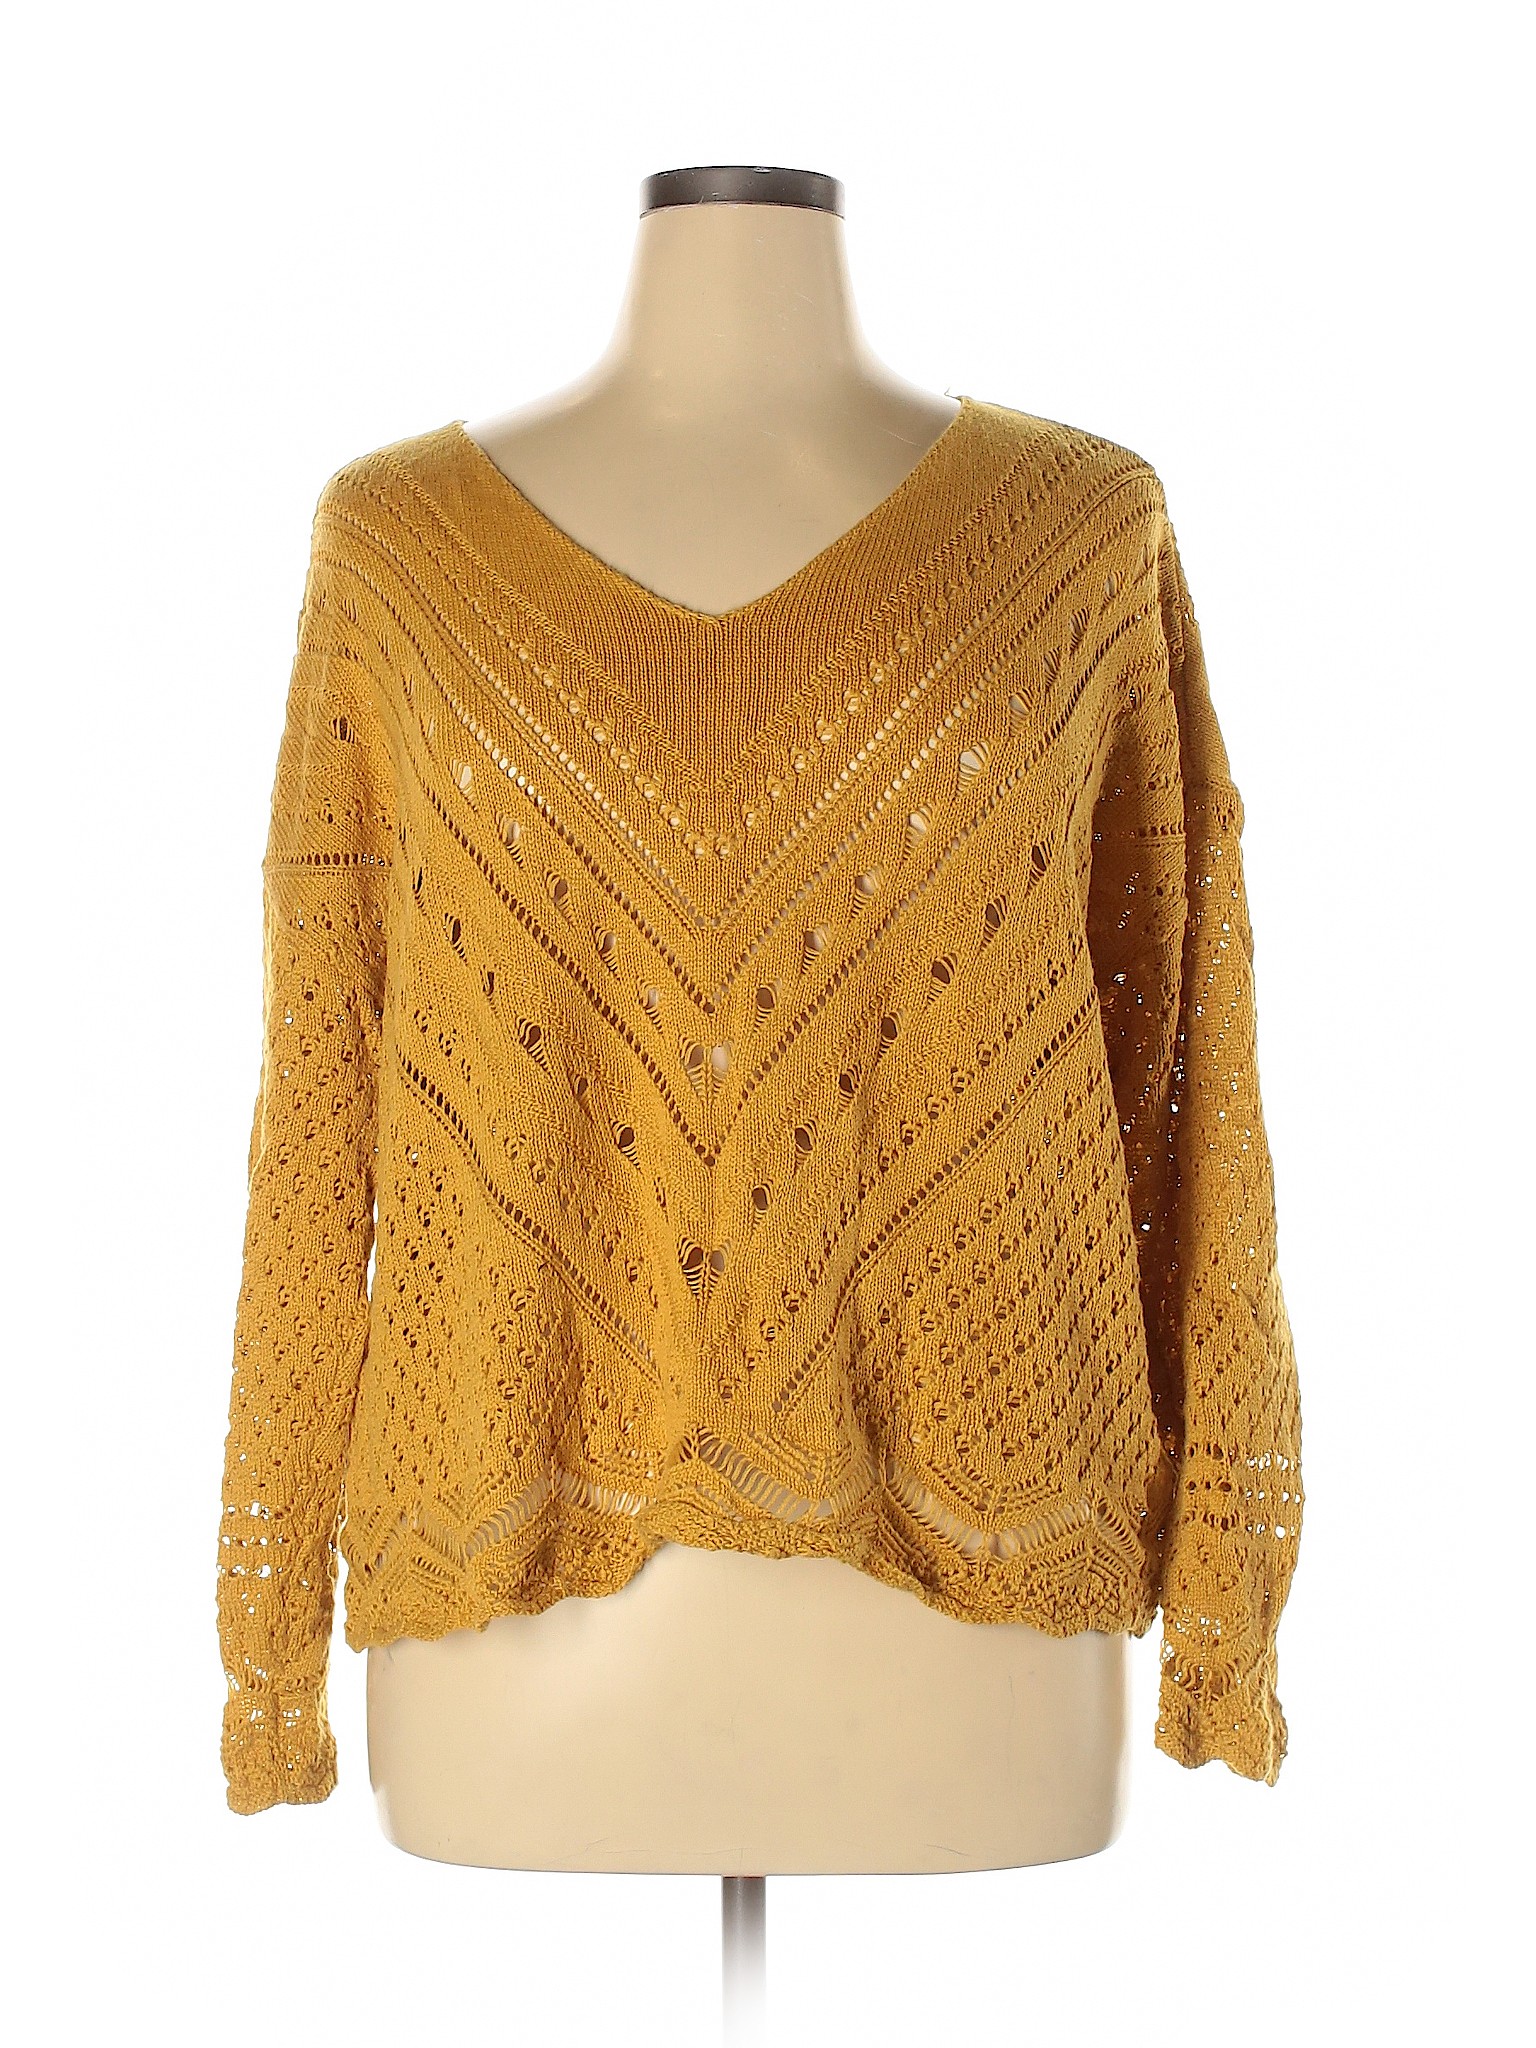 Maurices Women Yellow Pullover Sweater XL | eBay